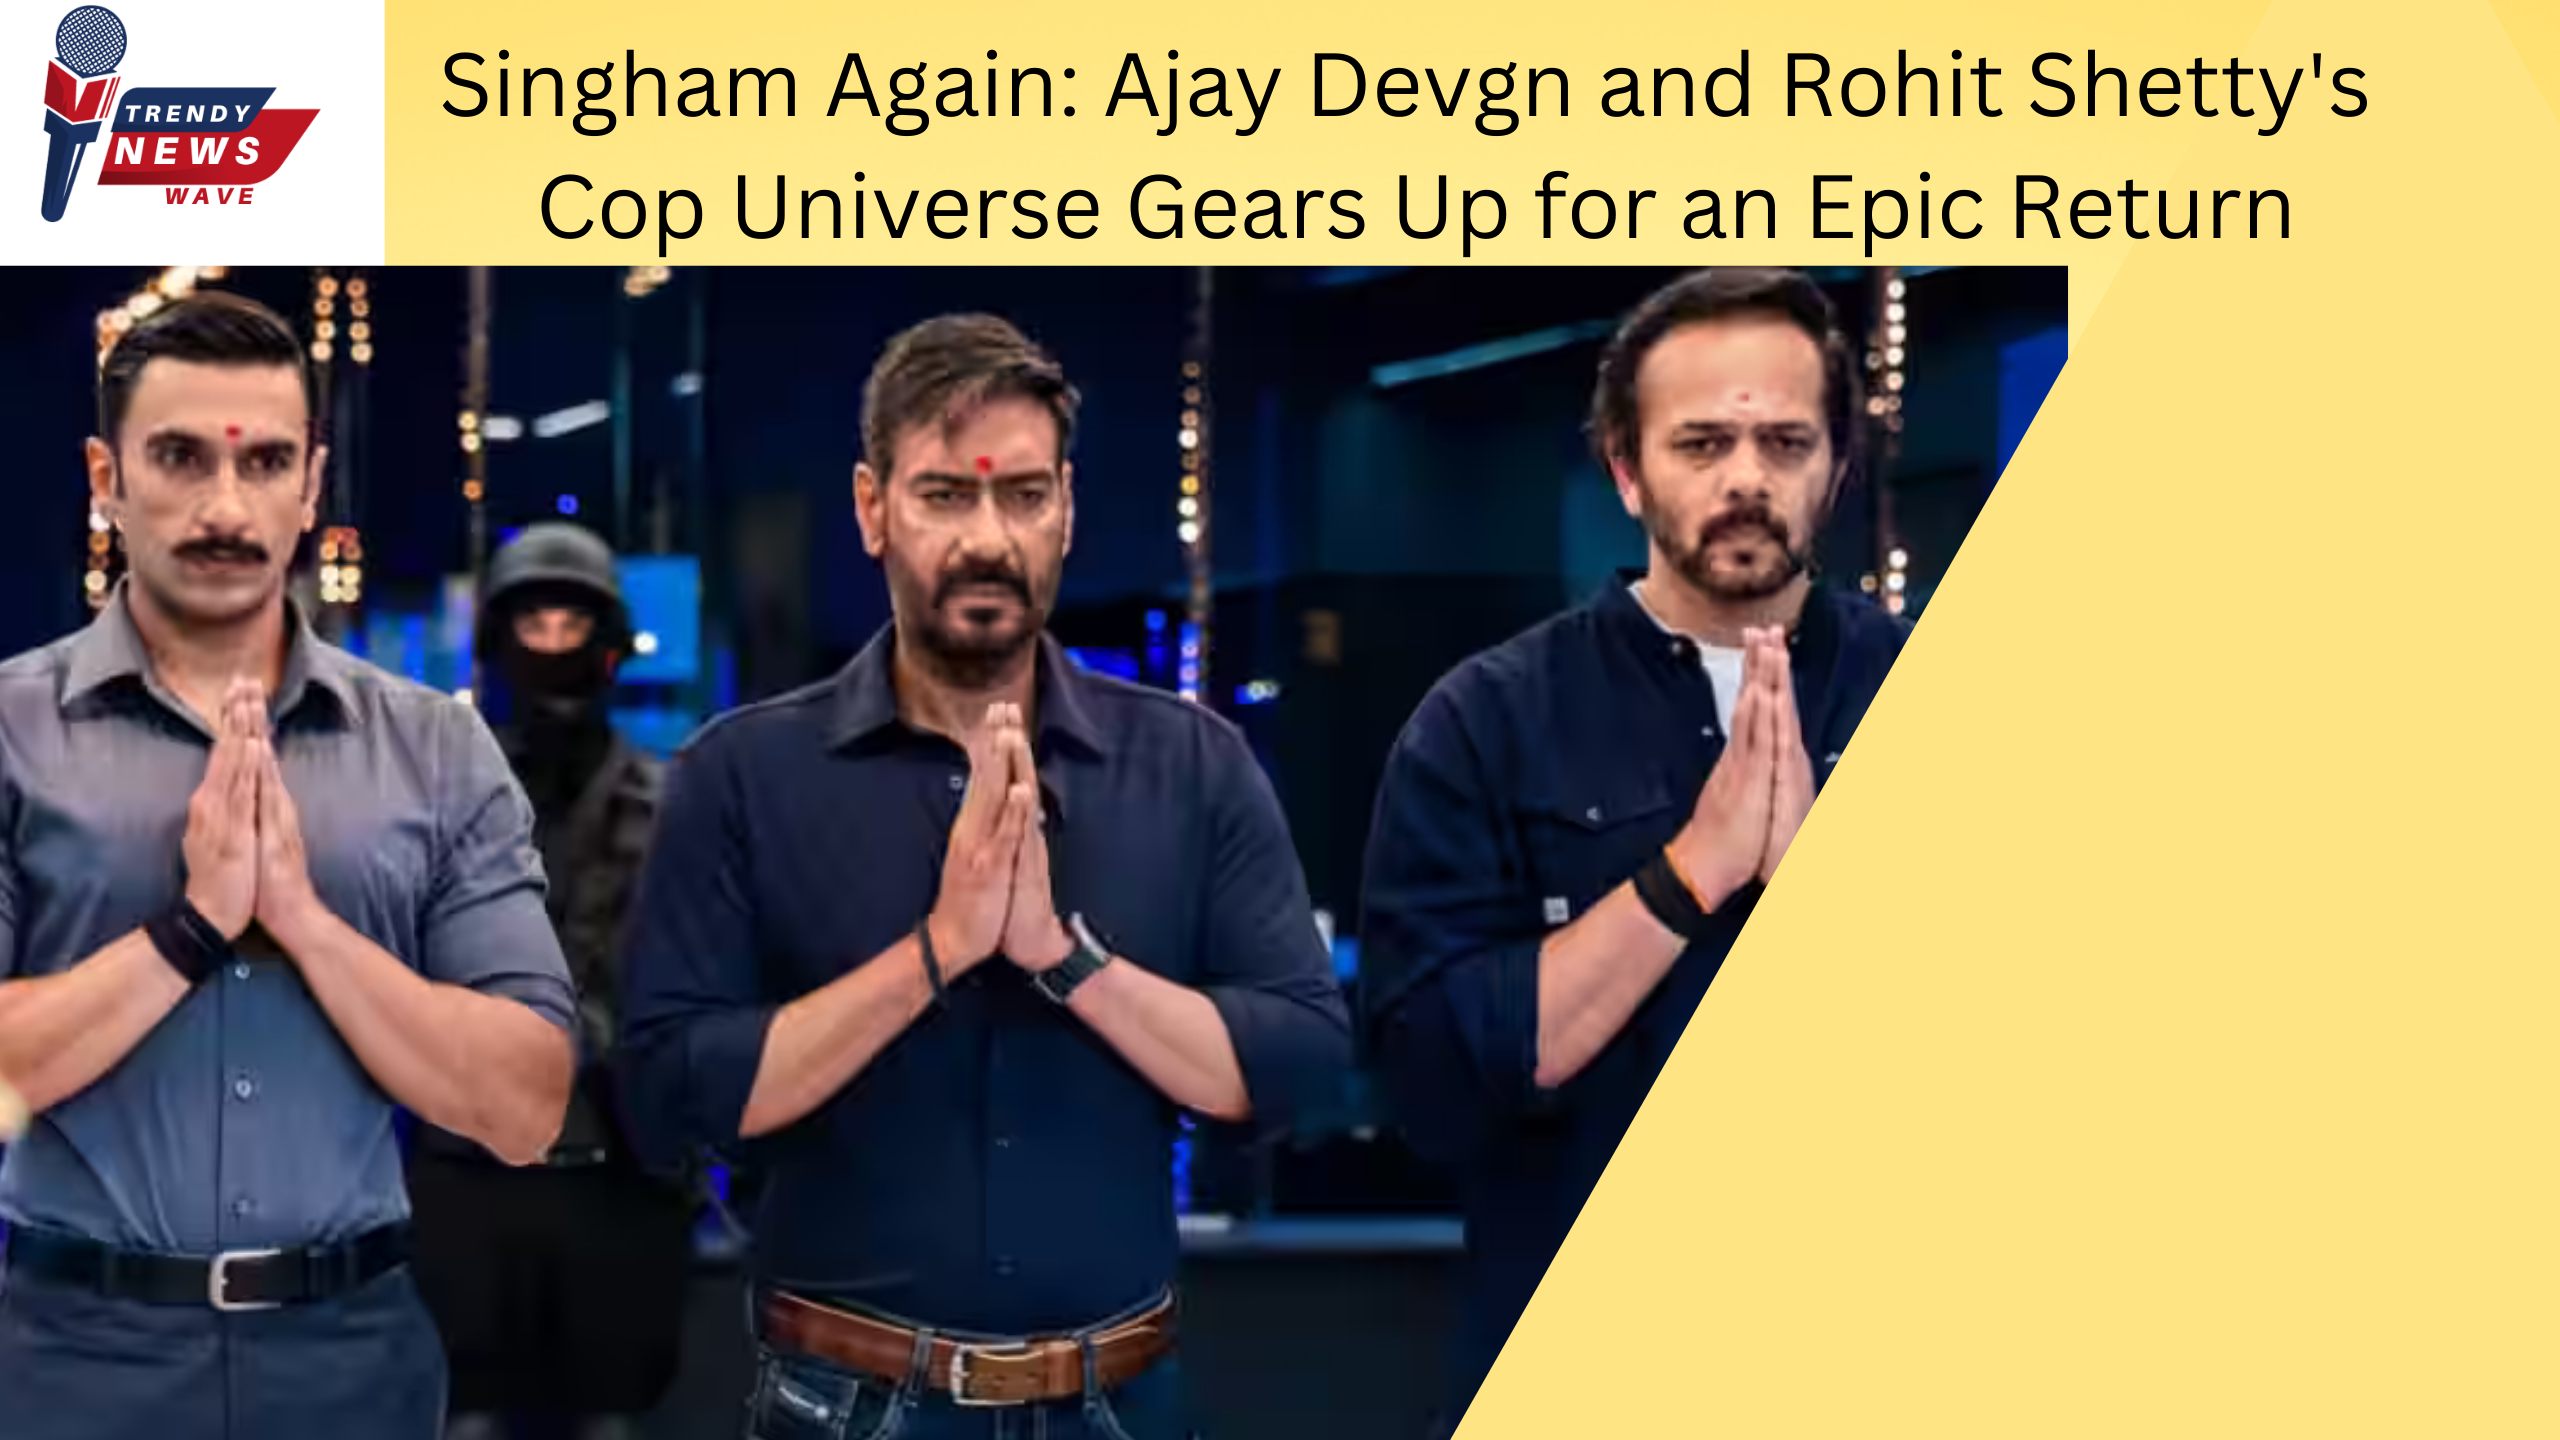 Singham Again: Ajay Devgn and Rohit Shetty's Cop Universe Gears Up for an Epic Return